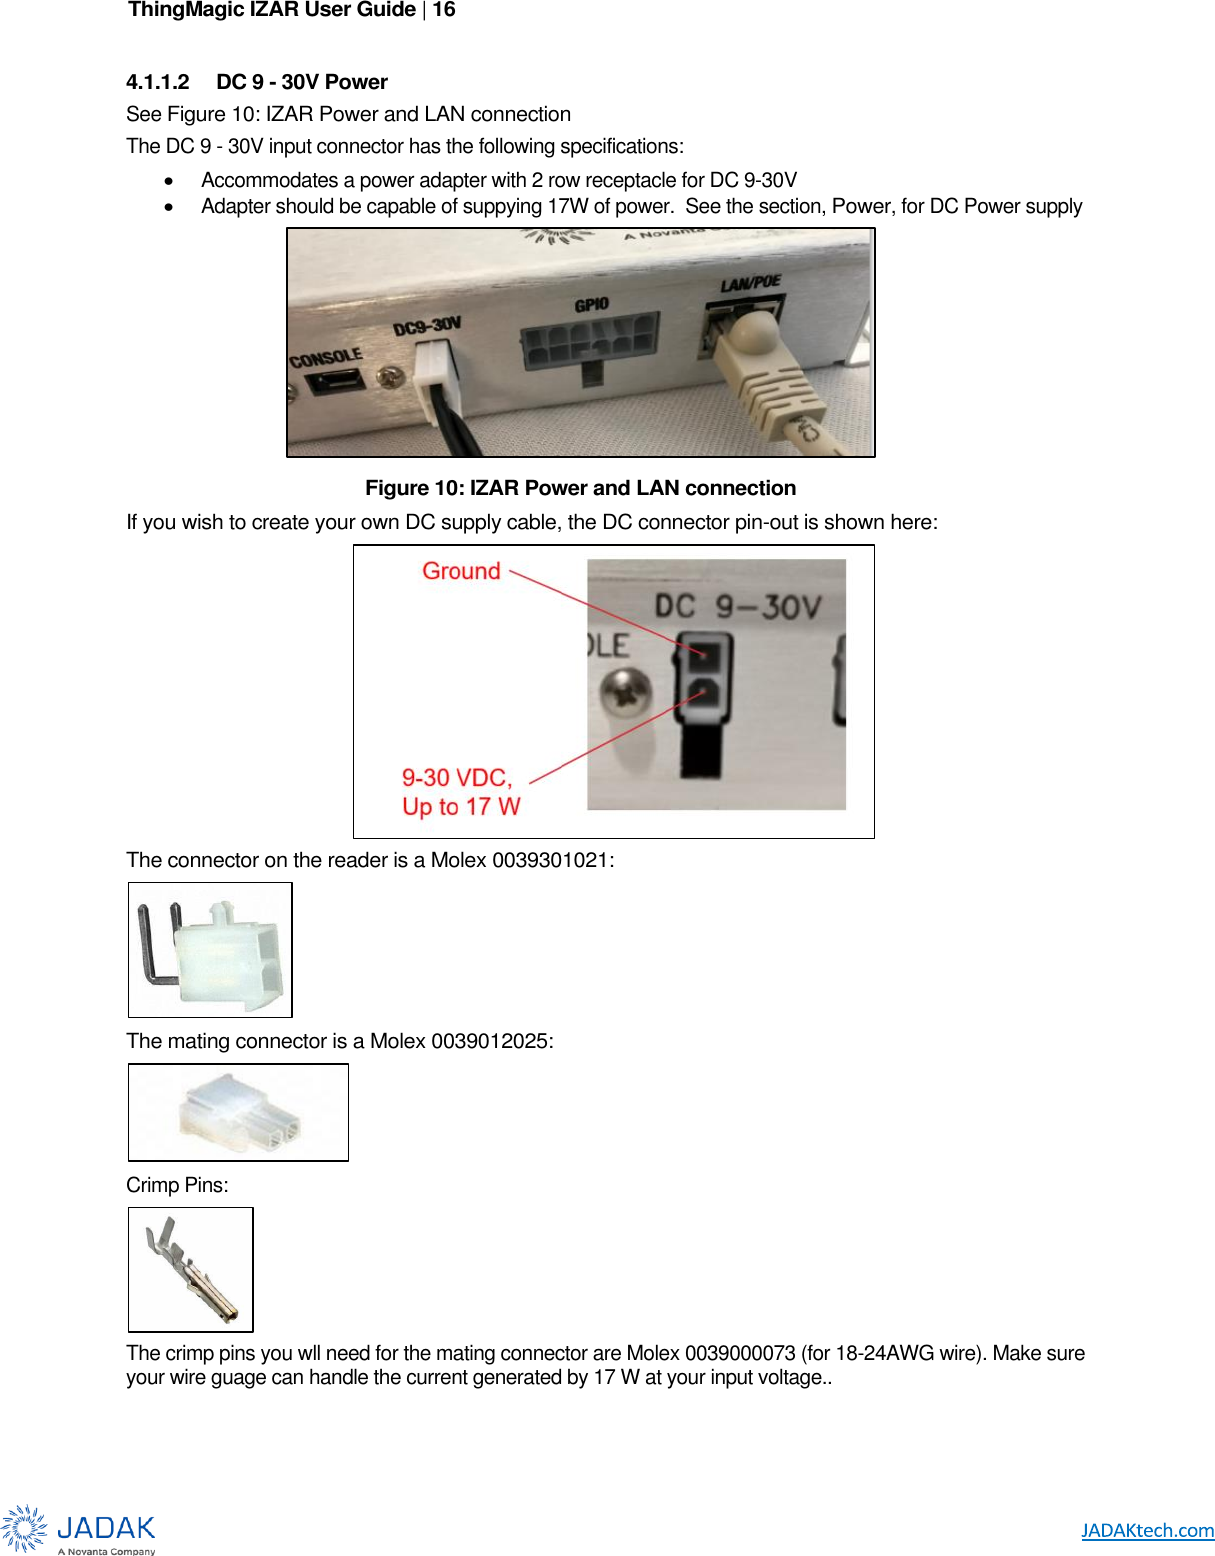 ThingMagic IZAR User Guide | 16      4.1.1.2  DC 9 - 30V Power See Figure 10: IZAR Power and LAN connection The DC 9 - 30V input connector has the following specifications:  Accommodates a power adapter with 2 row receptacle for DC 9-30V   Adapter should be capable of suppying 17W of power.  See the section, Power, for DC Power supply  If you wish to create your own DC supply cable, the DC connector pin-out is shown here:  The connector on the reader is a Molex 0039301021:  The mating connector is a Molex 0039012025:  Crimp Pins:  The crimp pins you wll need for the mating connector are Molex 0039000073 (for 18-24AWG wire). Make sure your wire guage can handle the current generated by 17 W at your input voltage.. Figure 10: IZAR Power and LAN connection 